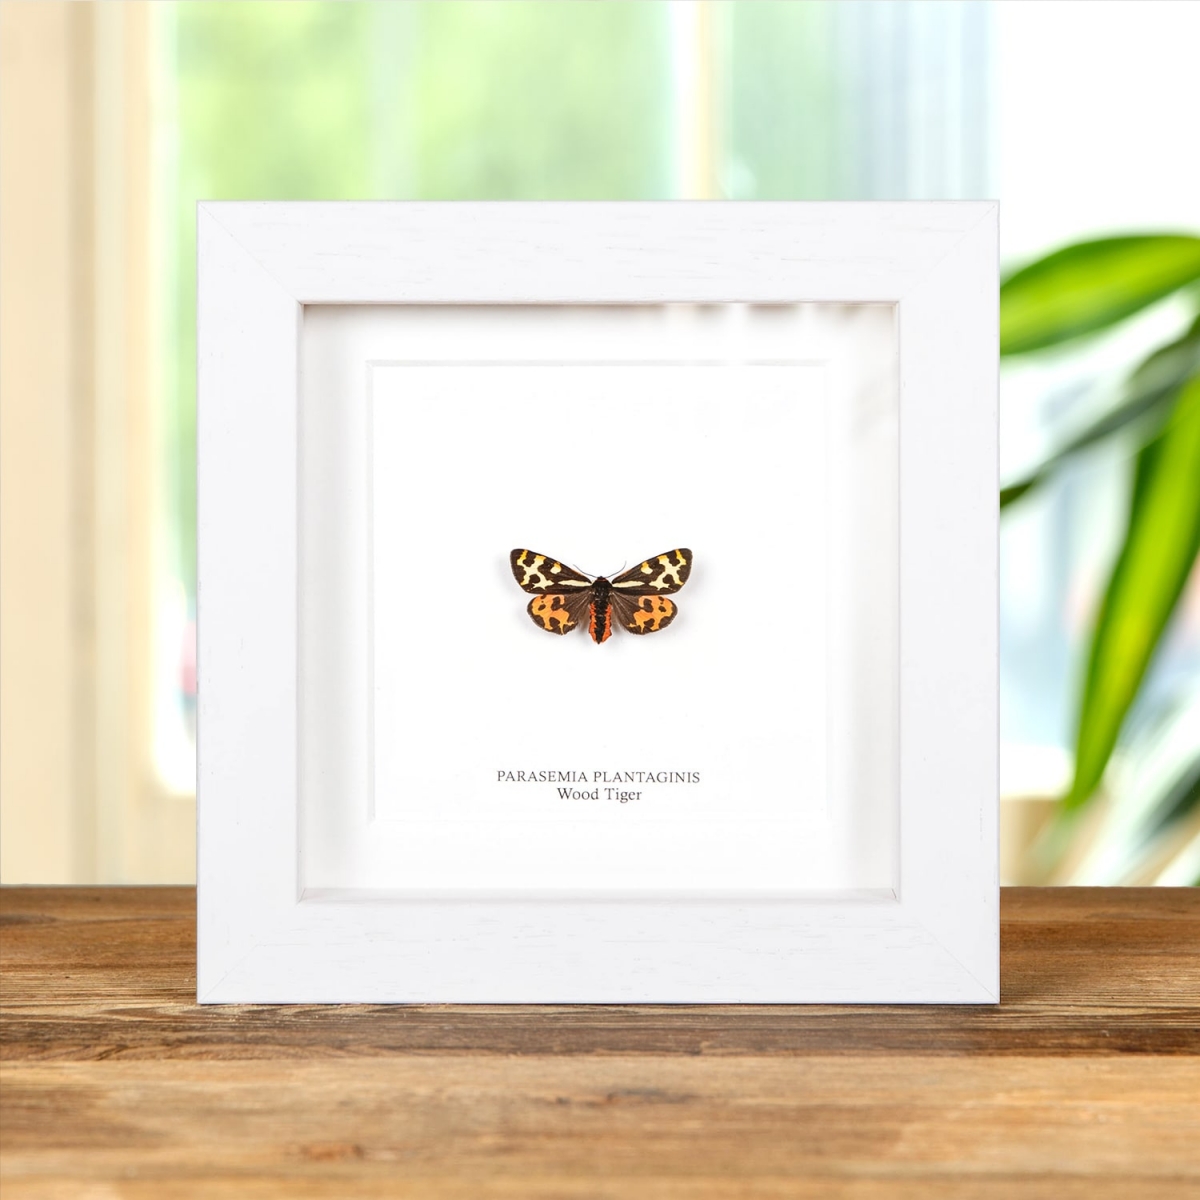 Wood Tiger Moth in Box Frame (Parasemia plantaginis)